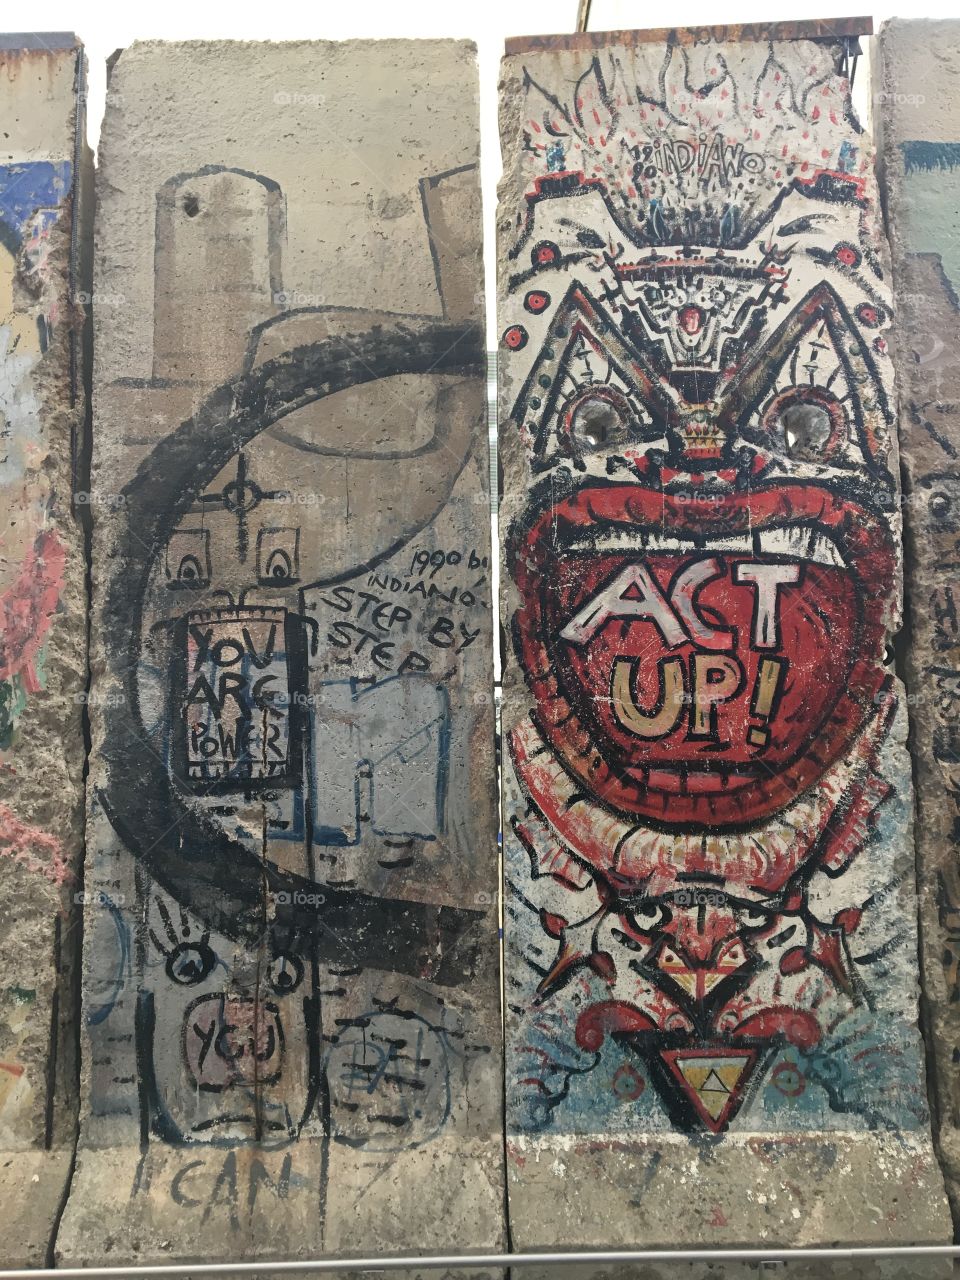 A piece of the Western side of the Berlin Wall that reminds us to speak up and act up in the face of oppression and fascism.